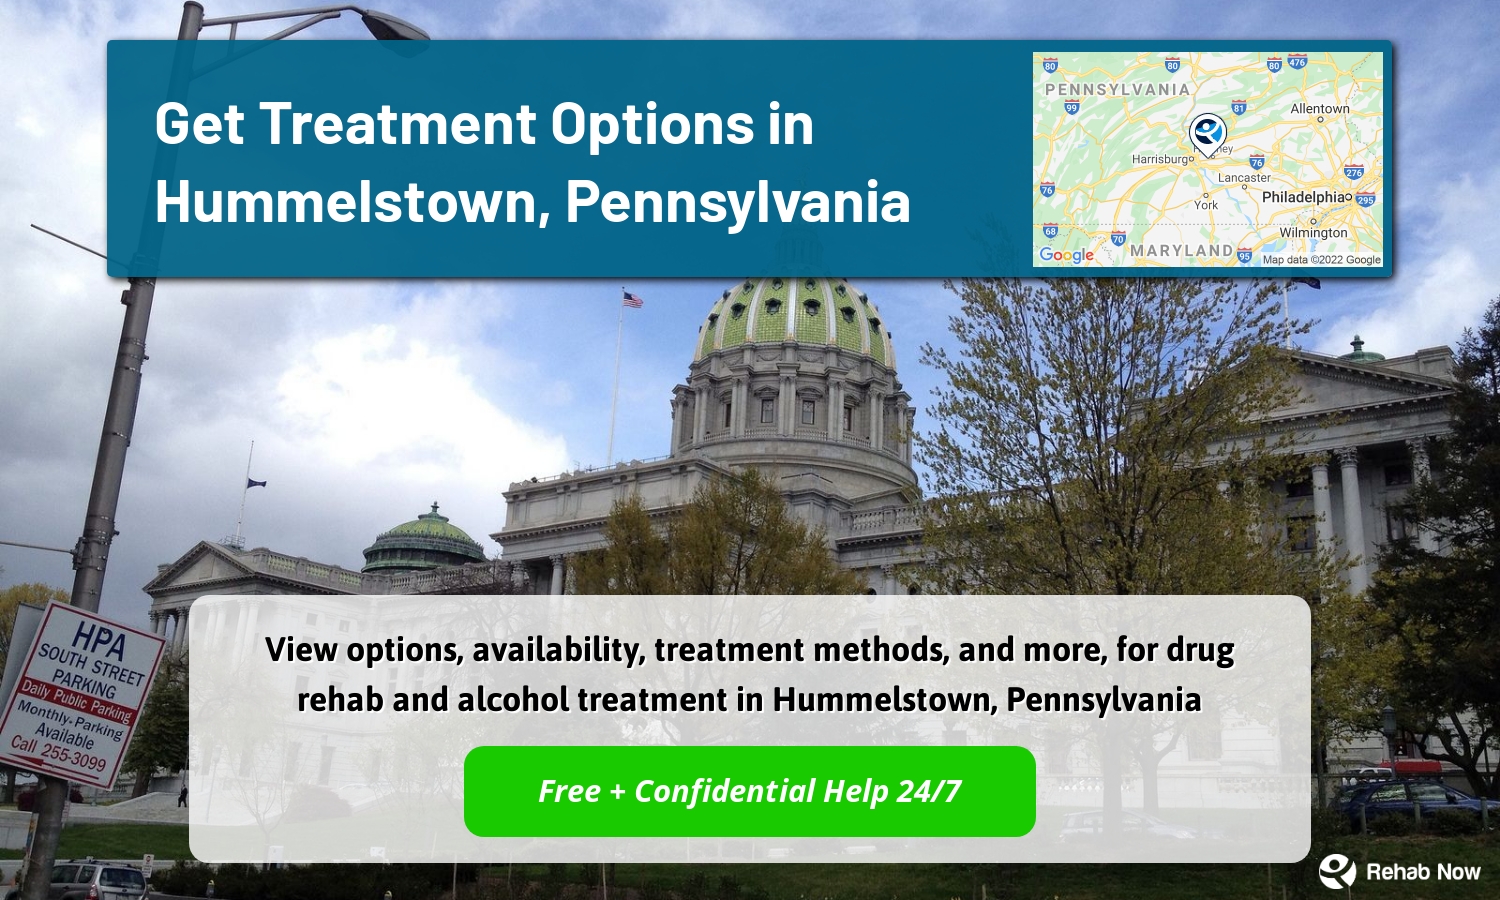 View options, availability, treatment methods, and more, for drug rehab and alcohol treatment in Hummelstown, Pennsylvania